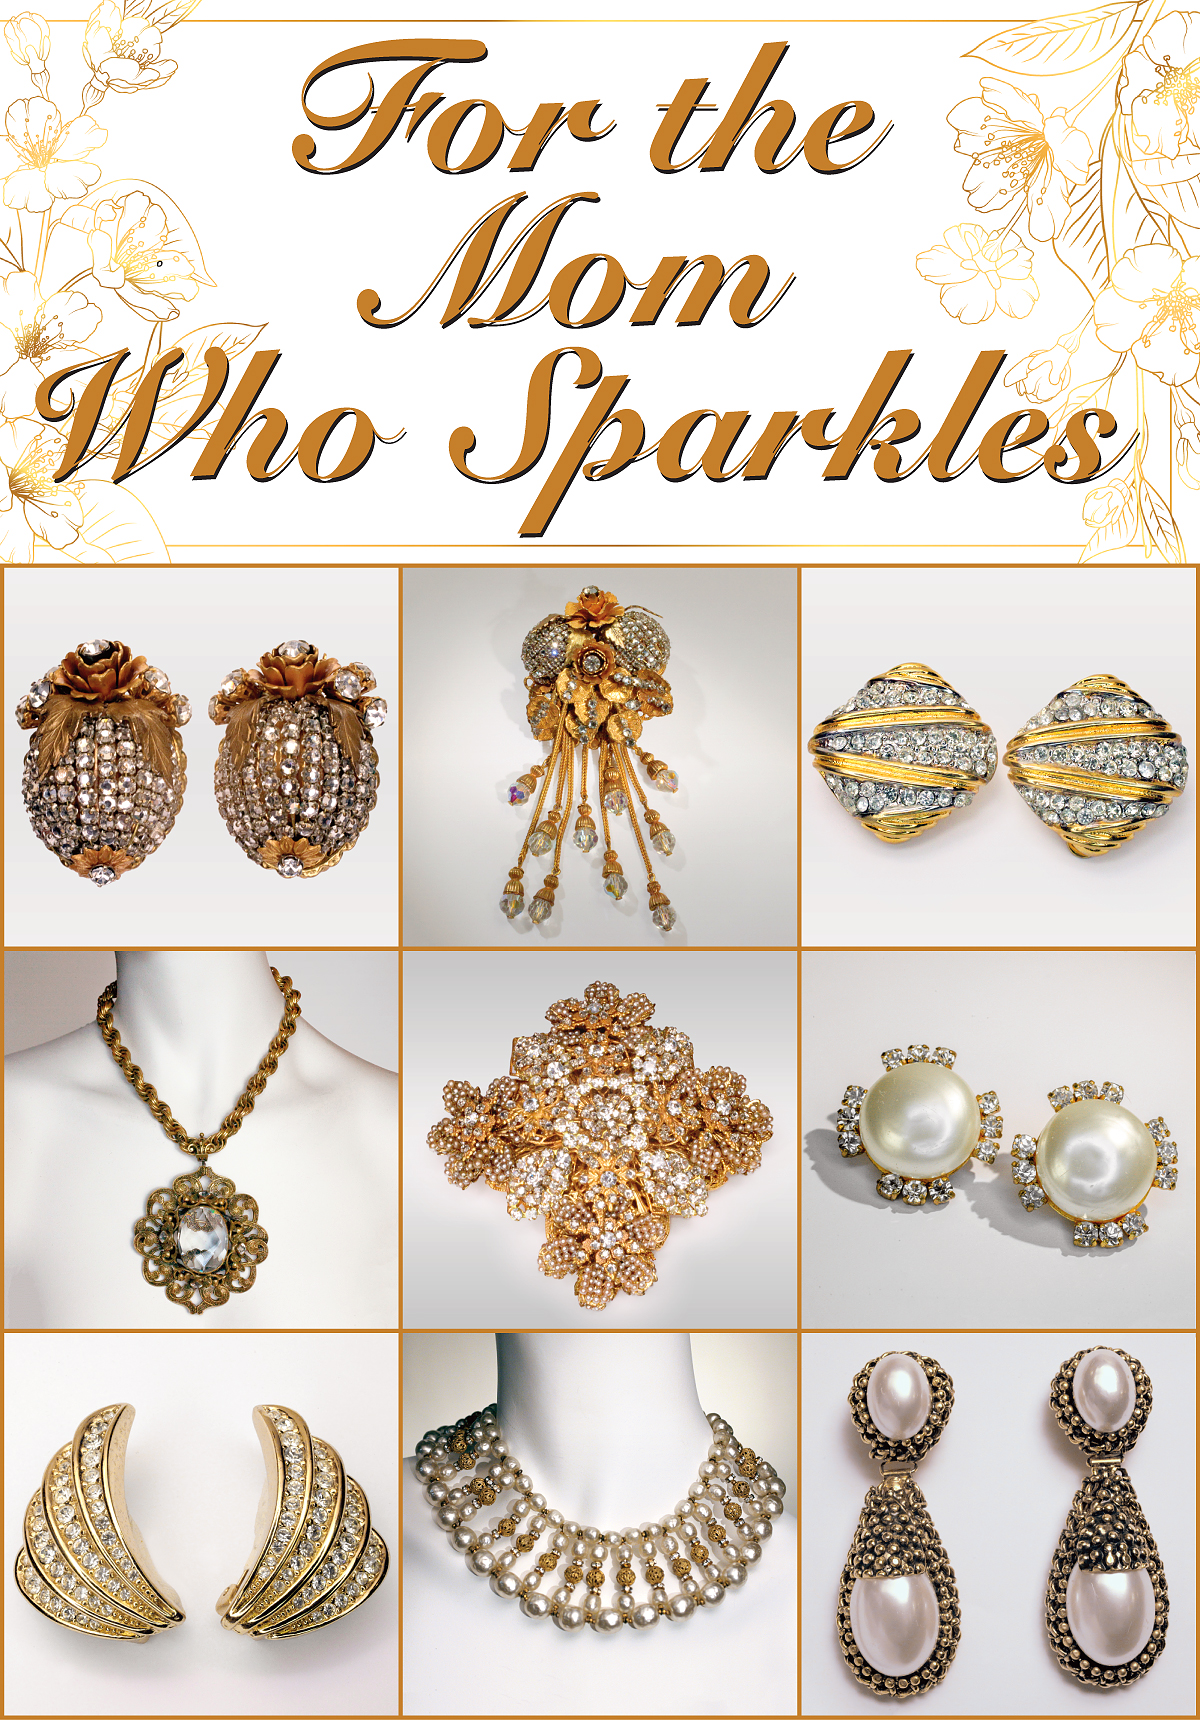 For the Mom Who Sparkles